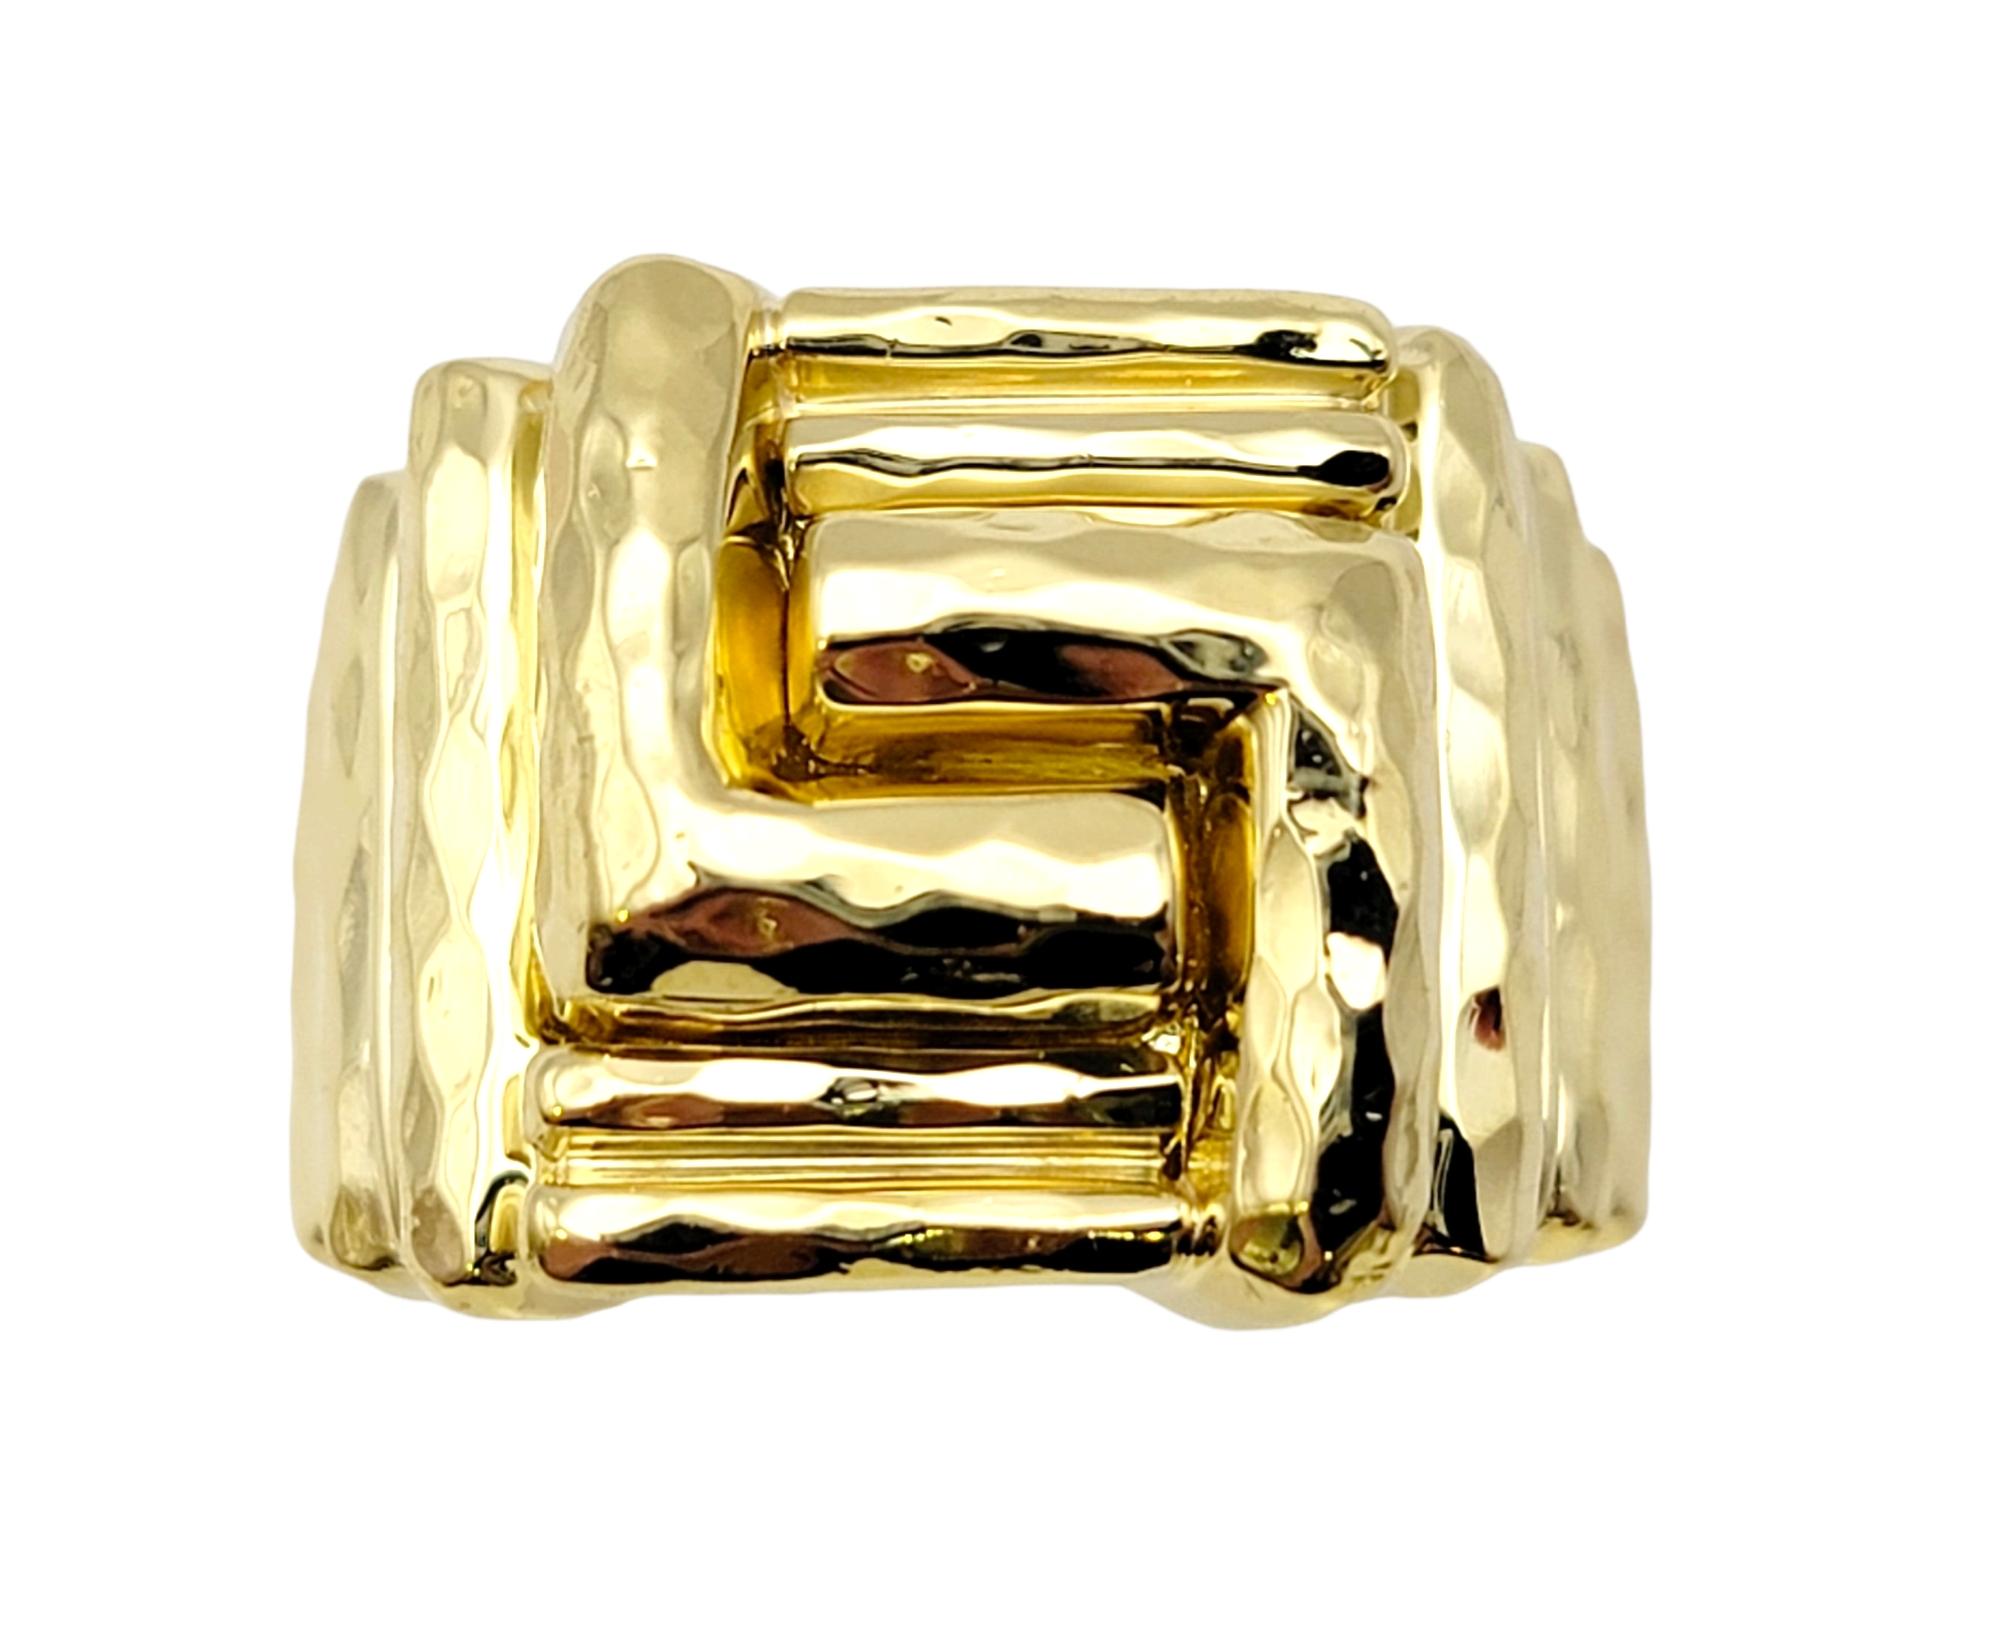 Ring size: 7.25

Uniquely textured hammered 18 karat yellow gold band ring by American jewelry designer, Henry Dunay. The contemporary geometric design offers understated sophistication, while the luxurious gold setting offers a sleek, polished